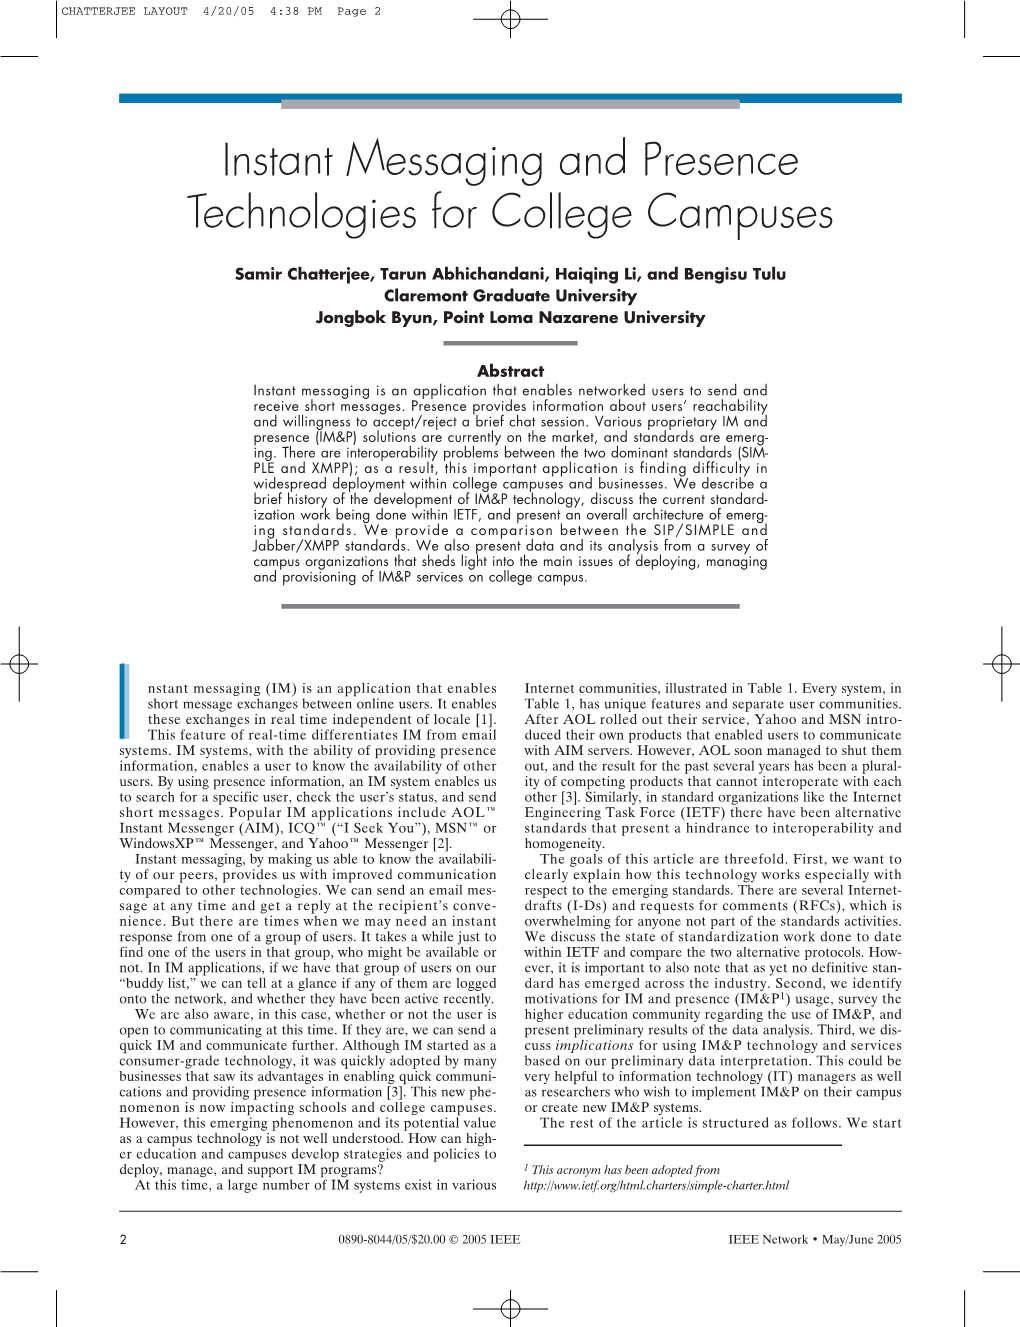 Instant Messaging and Presence Technologies for College Campuses